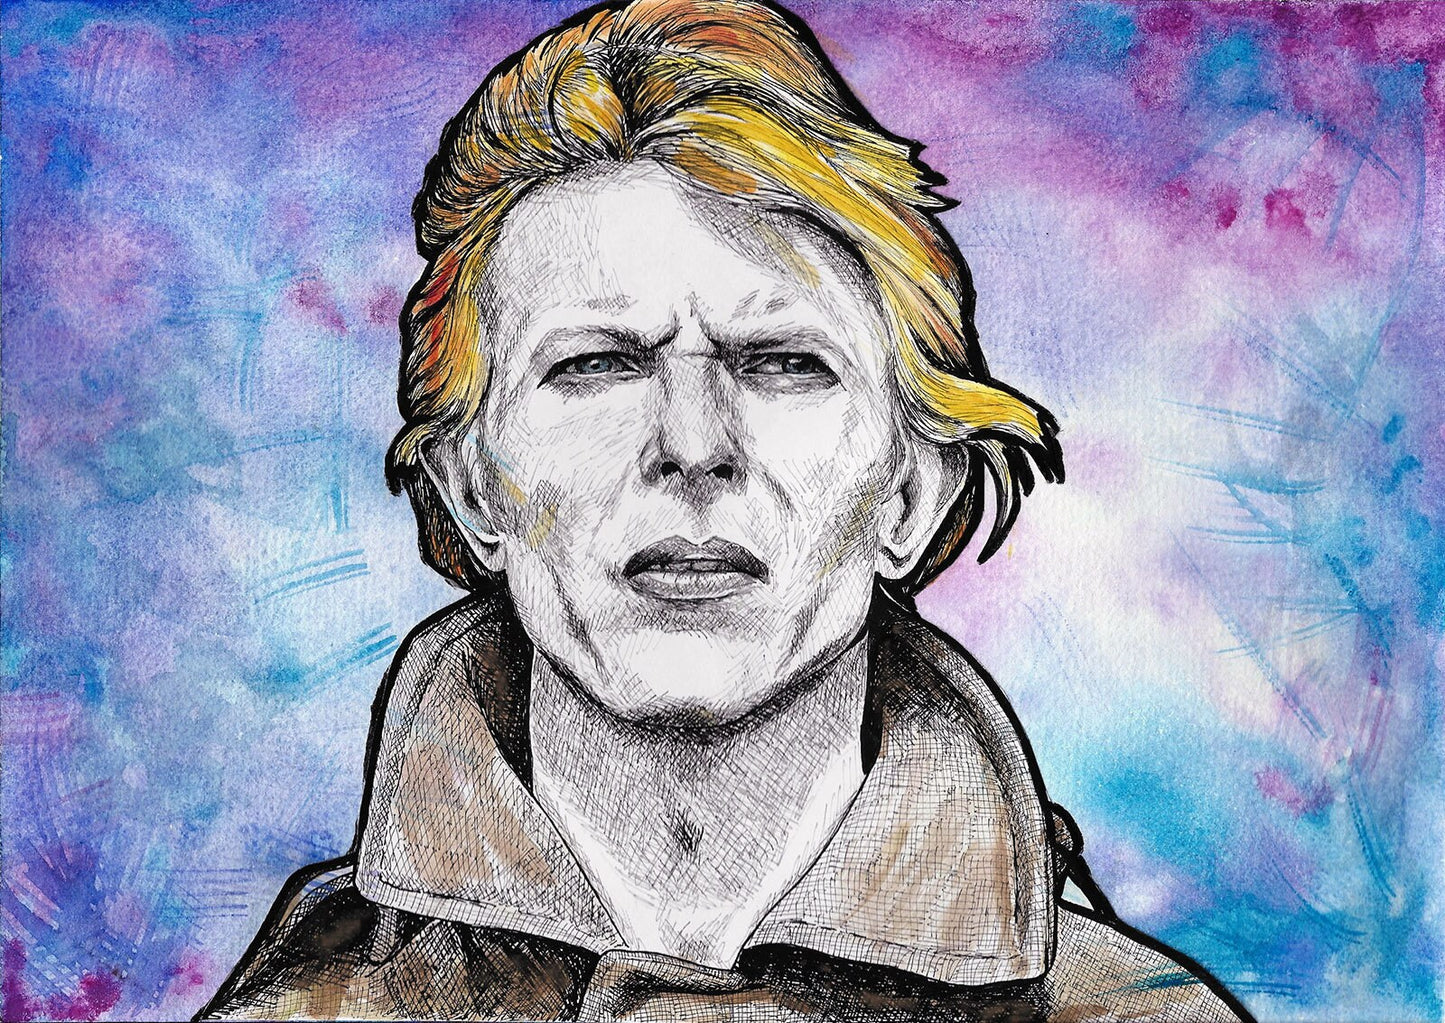 David Bowie watercolour and ink portrait, unframed, The Man Who Fell To Earth, David Bowie painting, gift for Bowie fan, original artwork